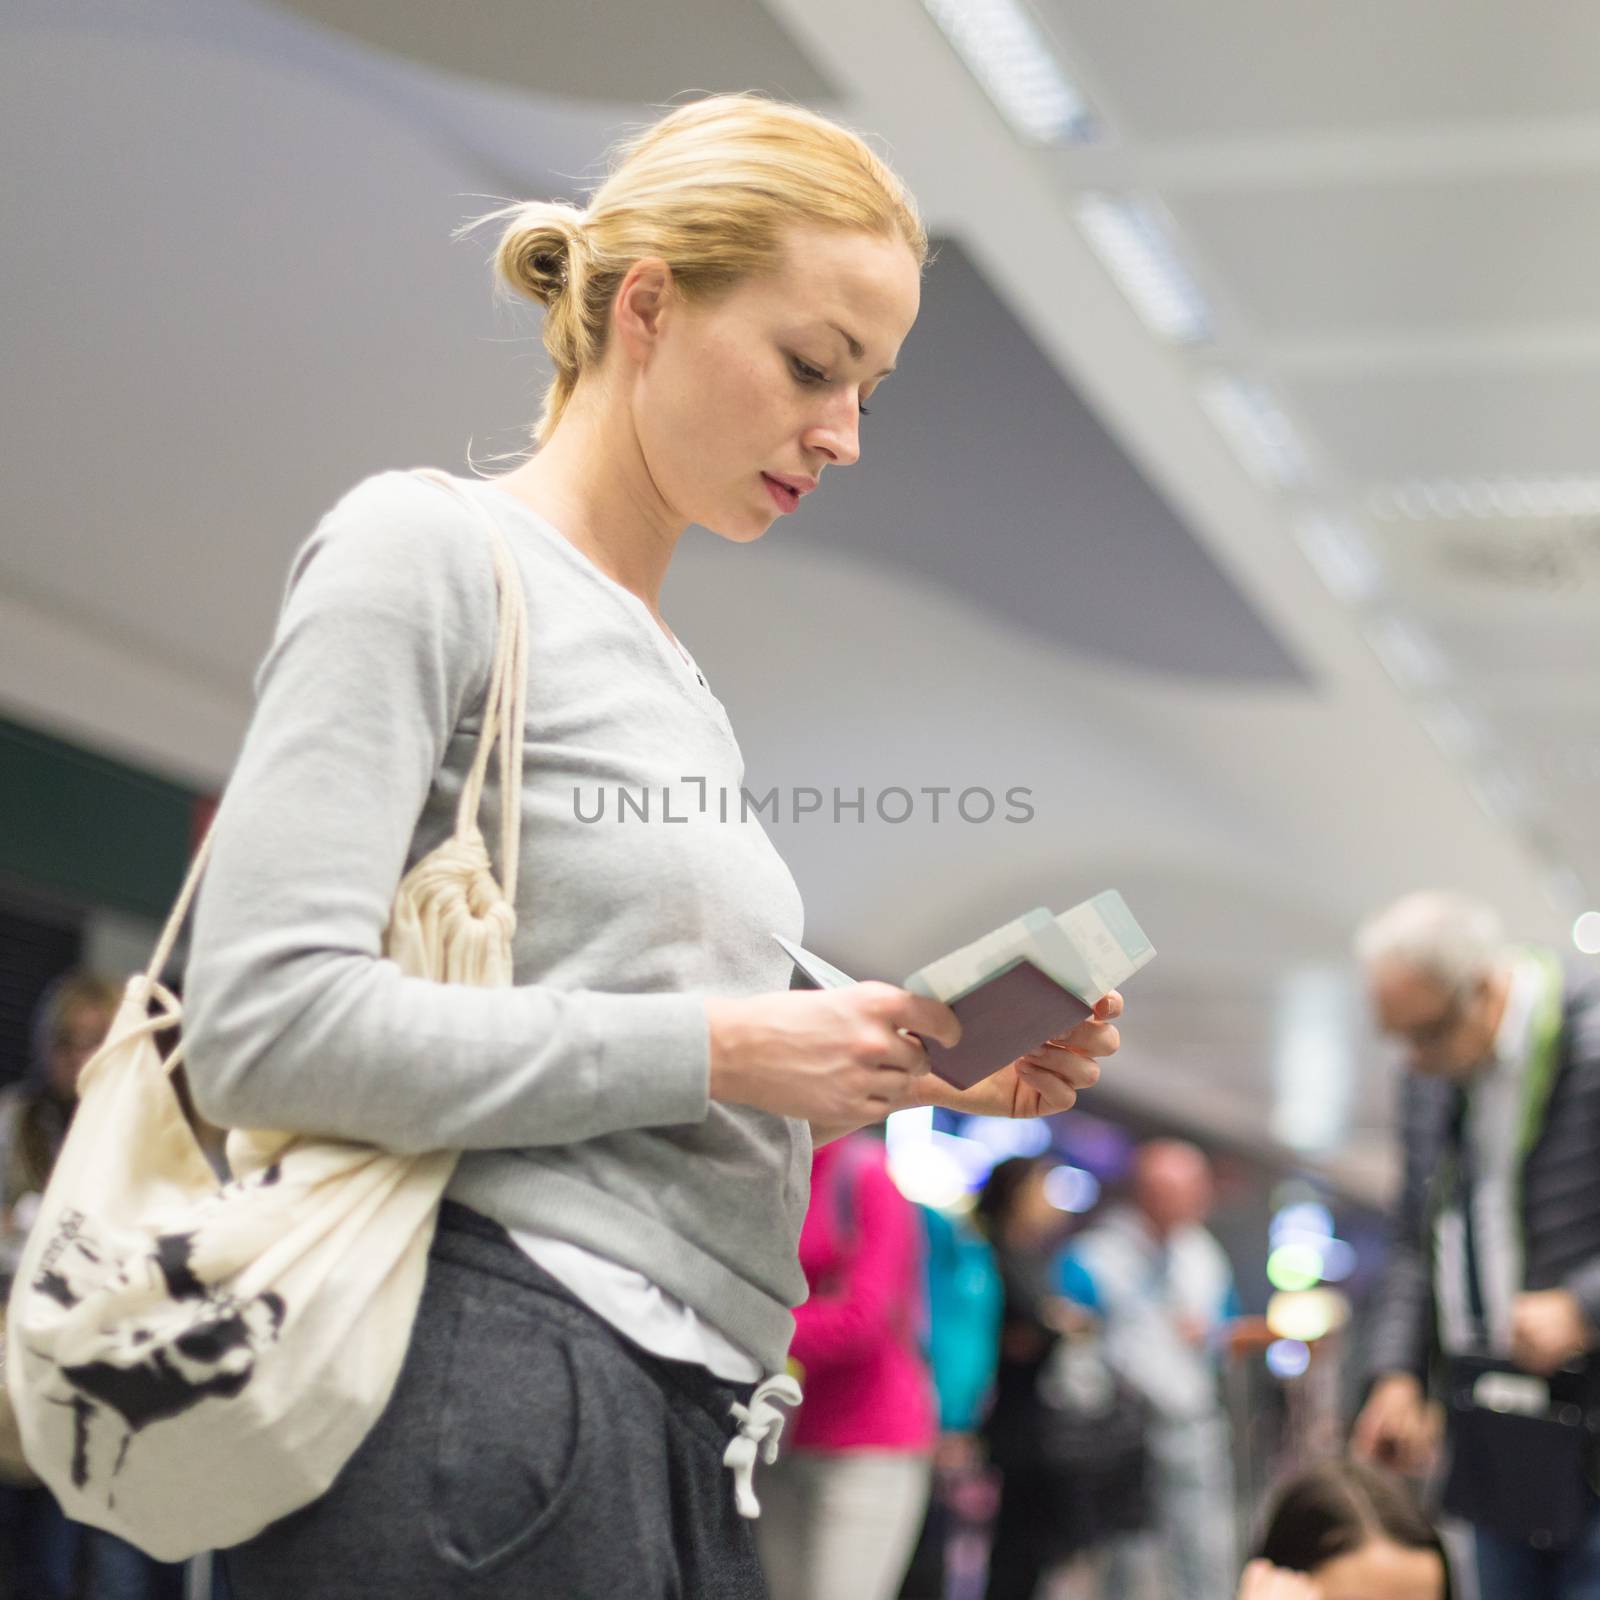 Casualy dressed woman checking flight informations on airplane ticket while waiting for her flight at airport.